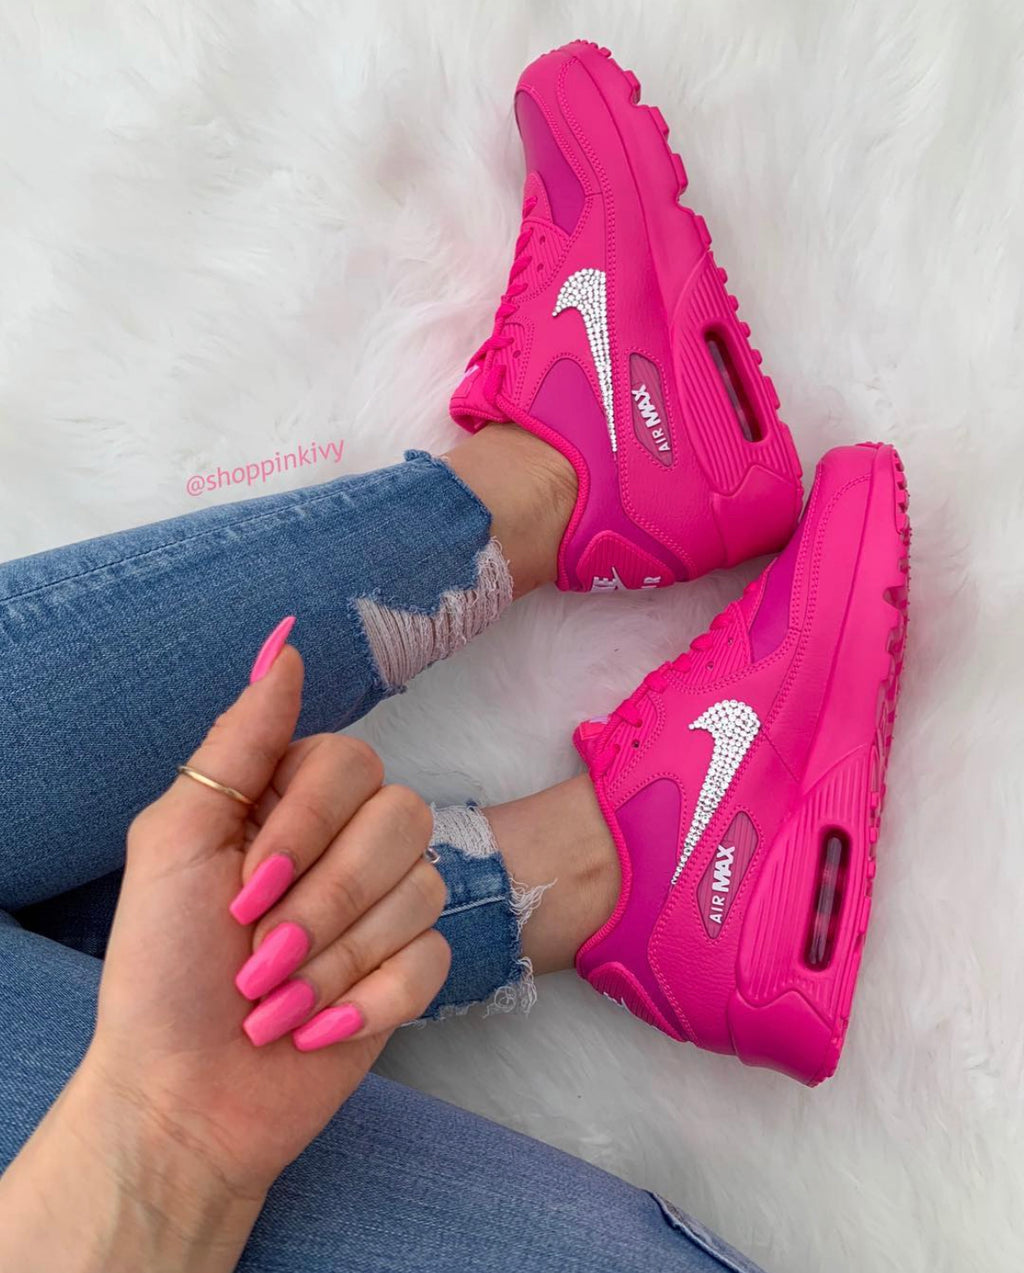 Nike Shoes Nike air max 270 Adidas shoes by Shoppinkivy – Pink Ivy